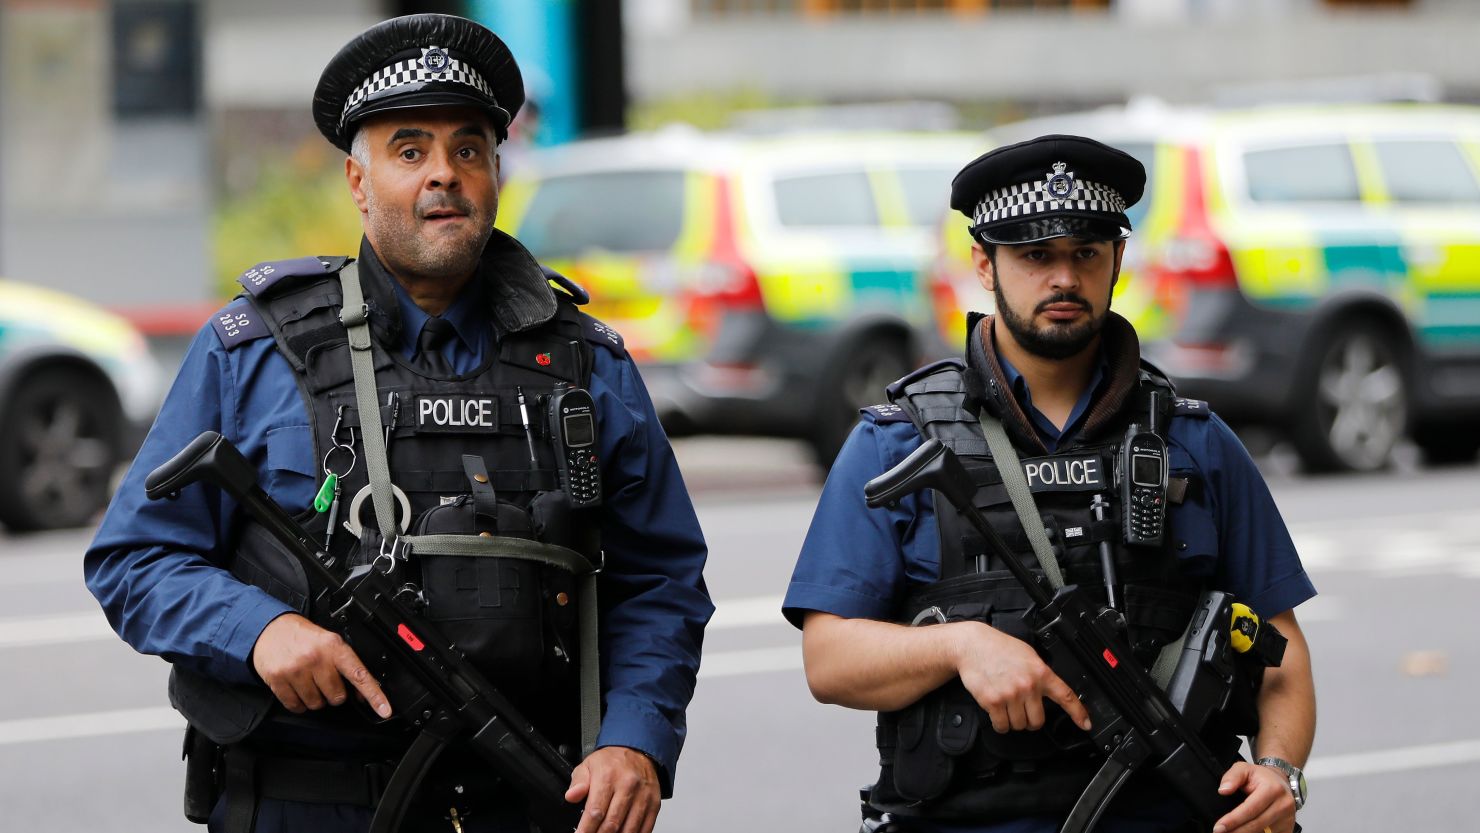 Armed police officers stand on duty following an incident in London in October.